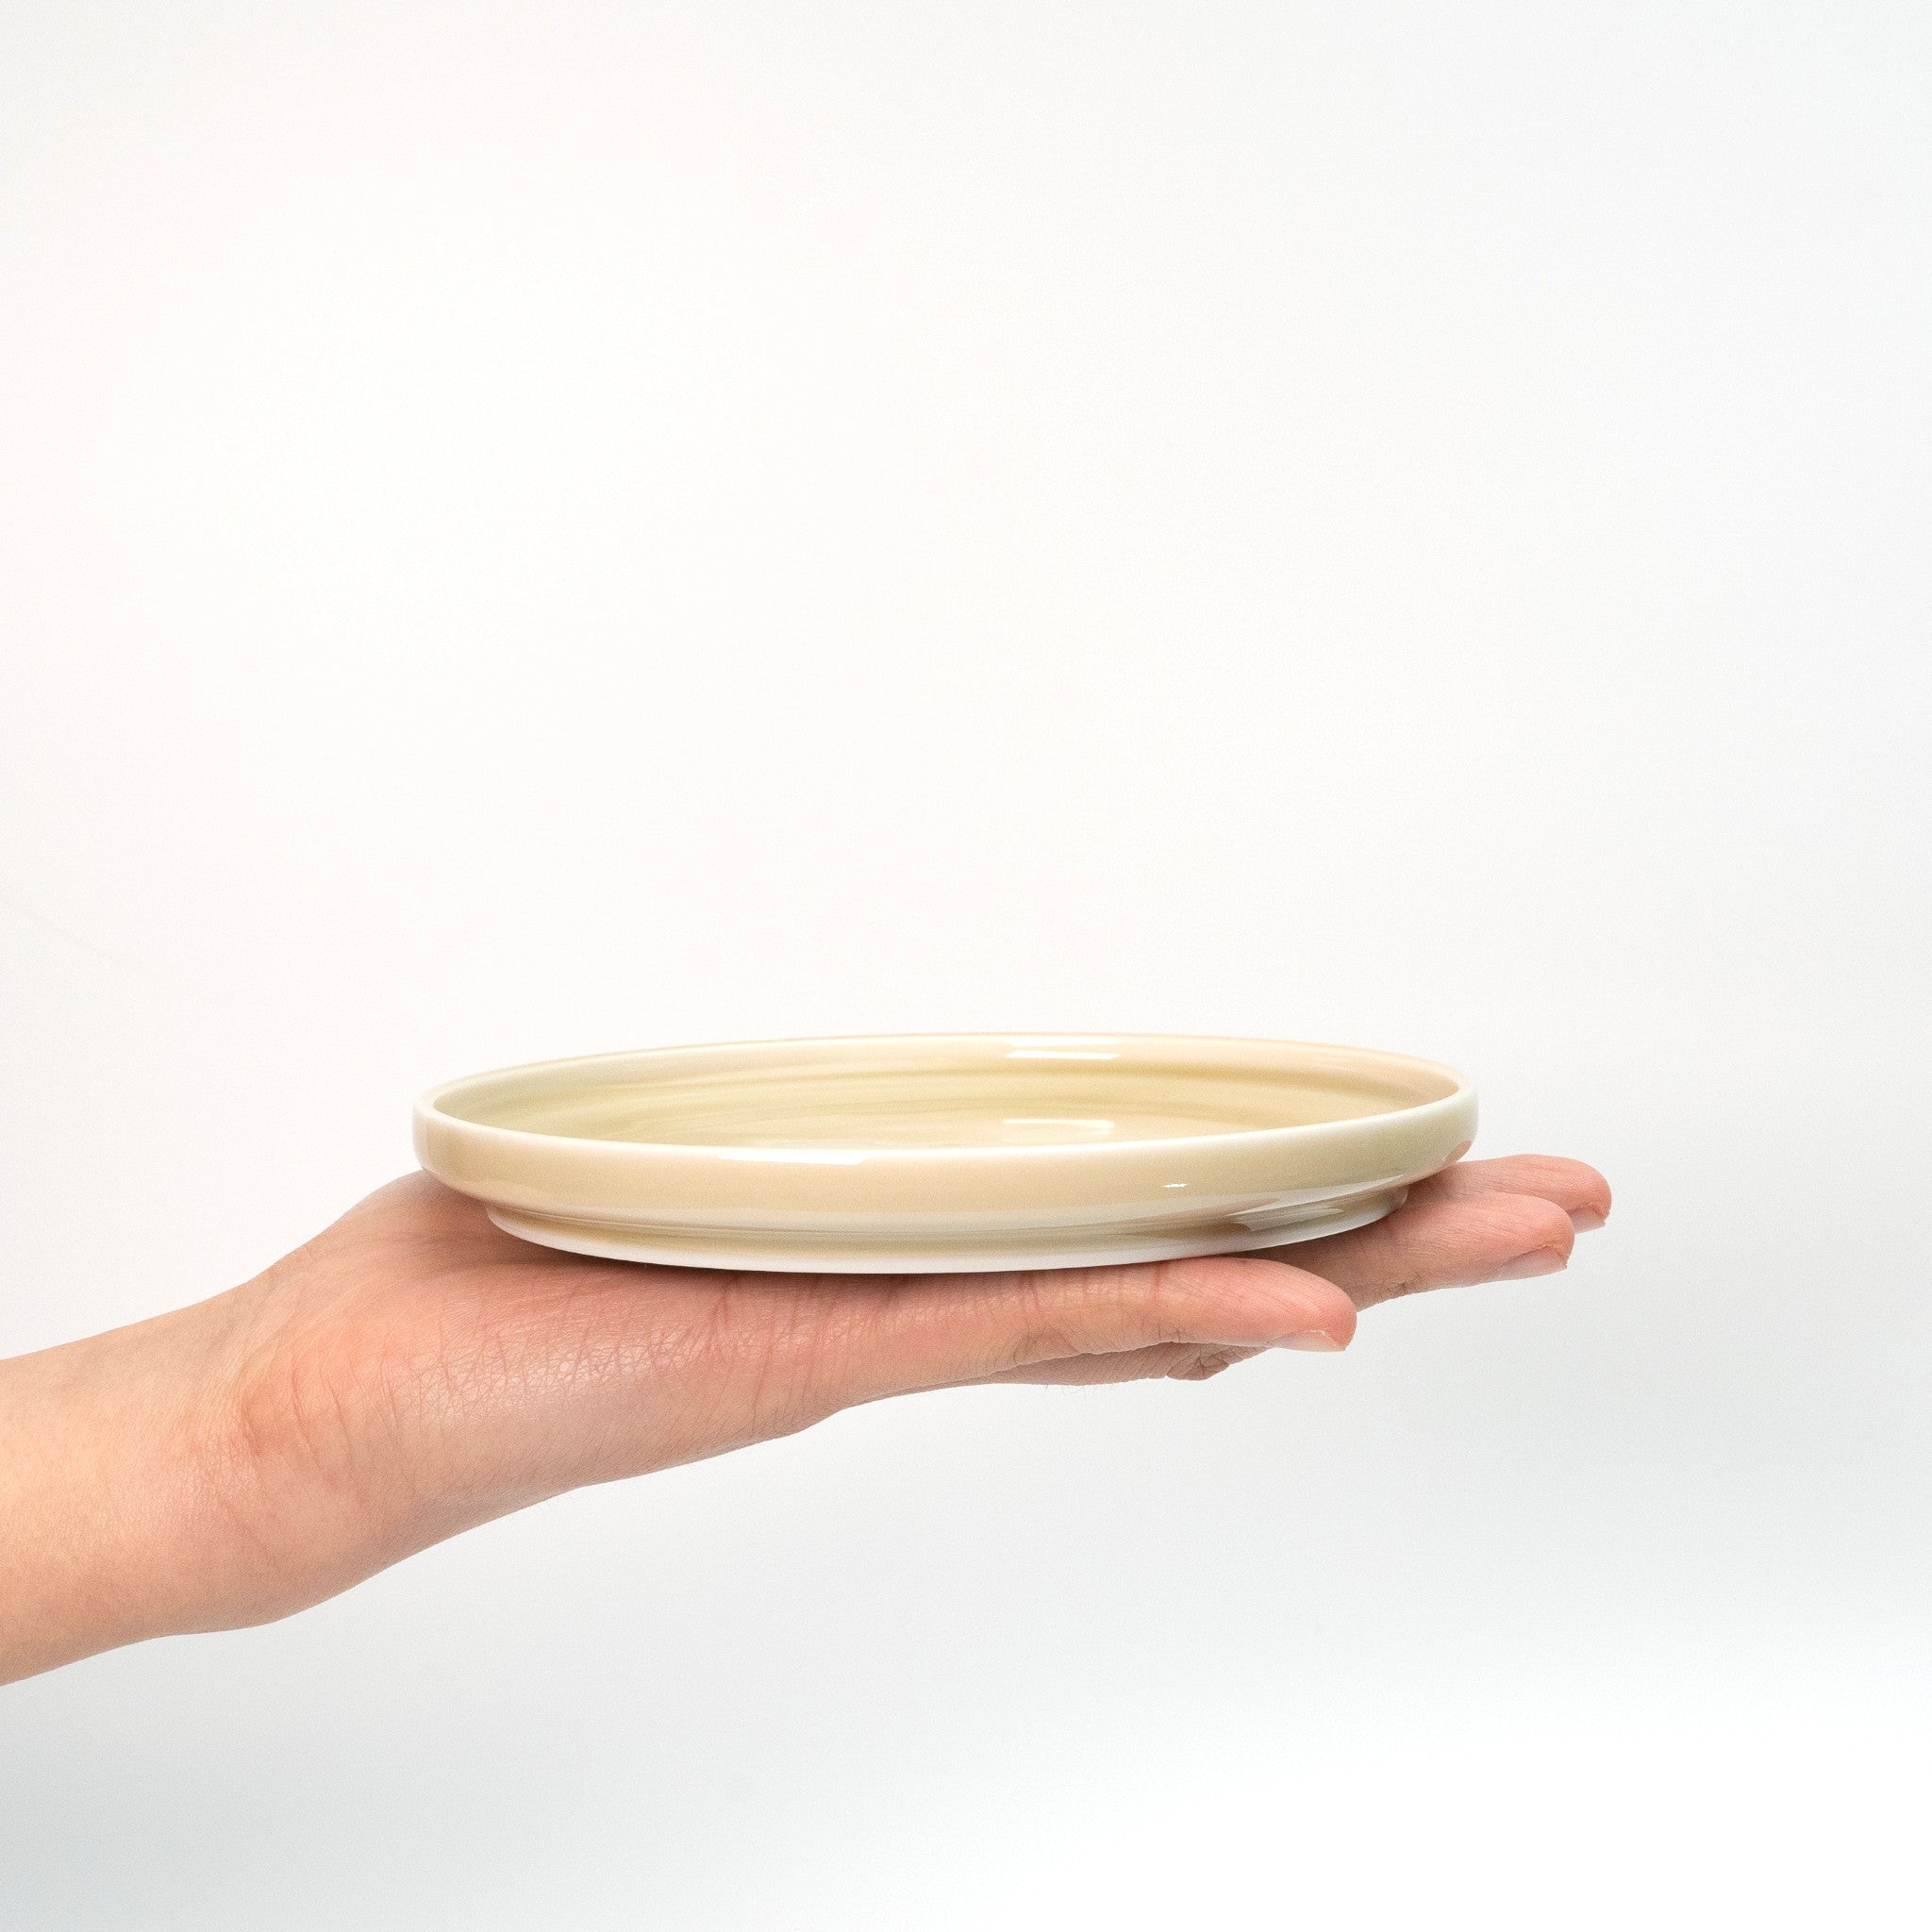 Trip Ware Saucer/Plate - Ivory - 13 cm